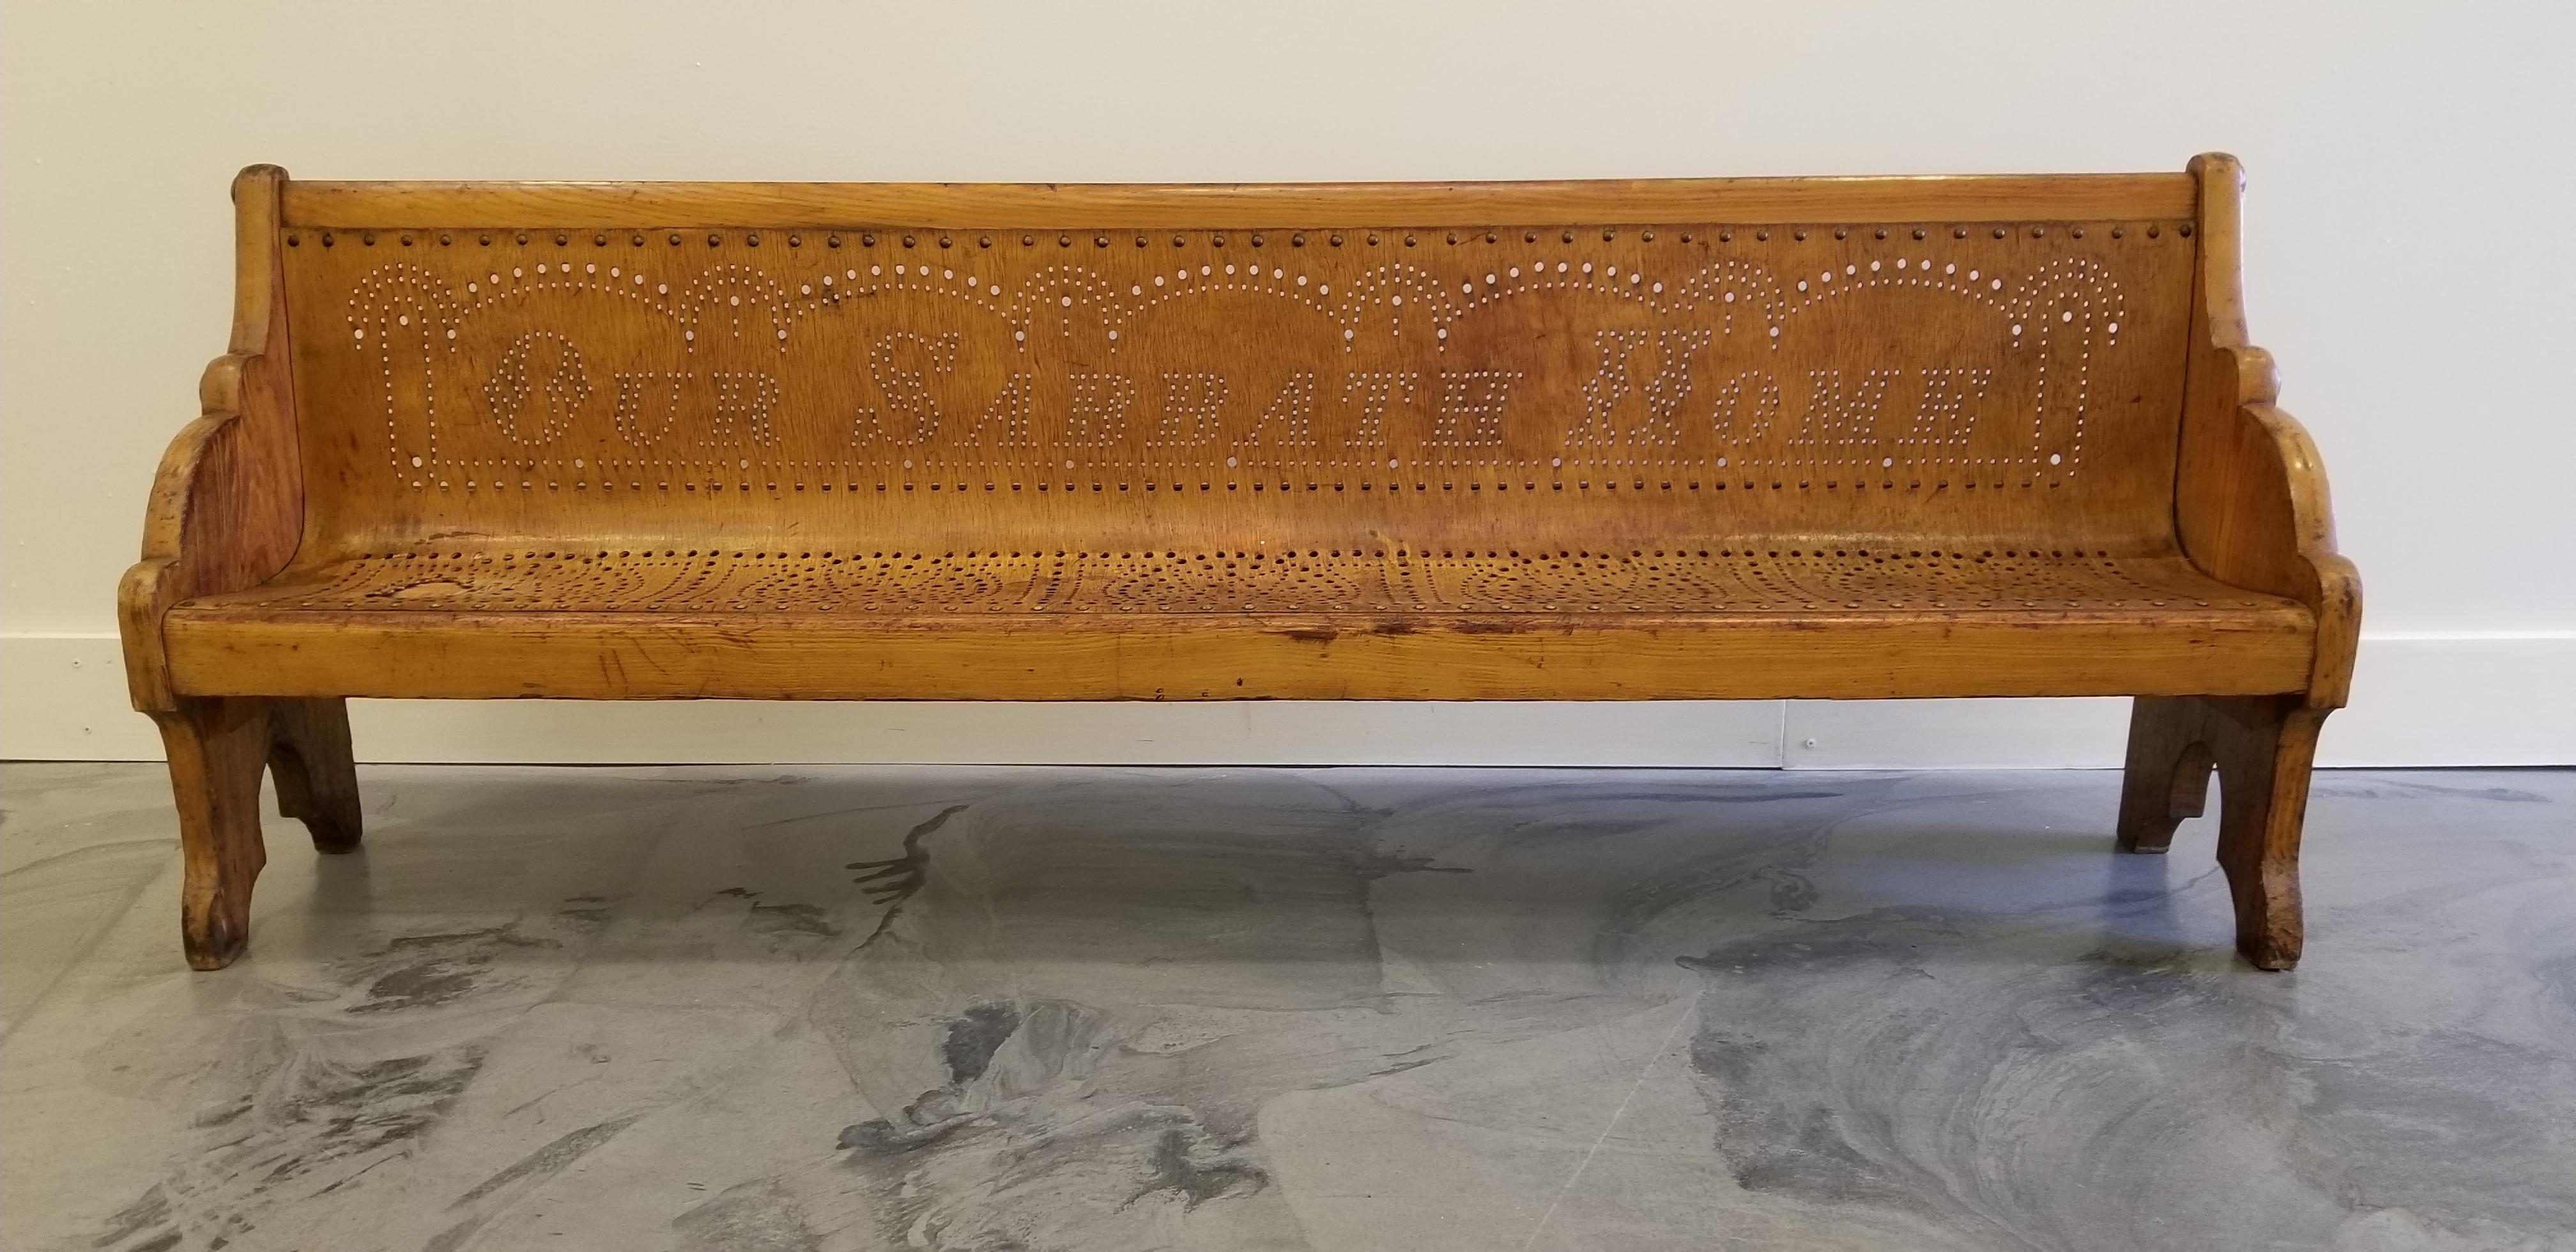 Here is a unique and charming Folk Art bench with intricate pierce-cut decoration. In verse 